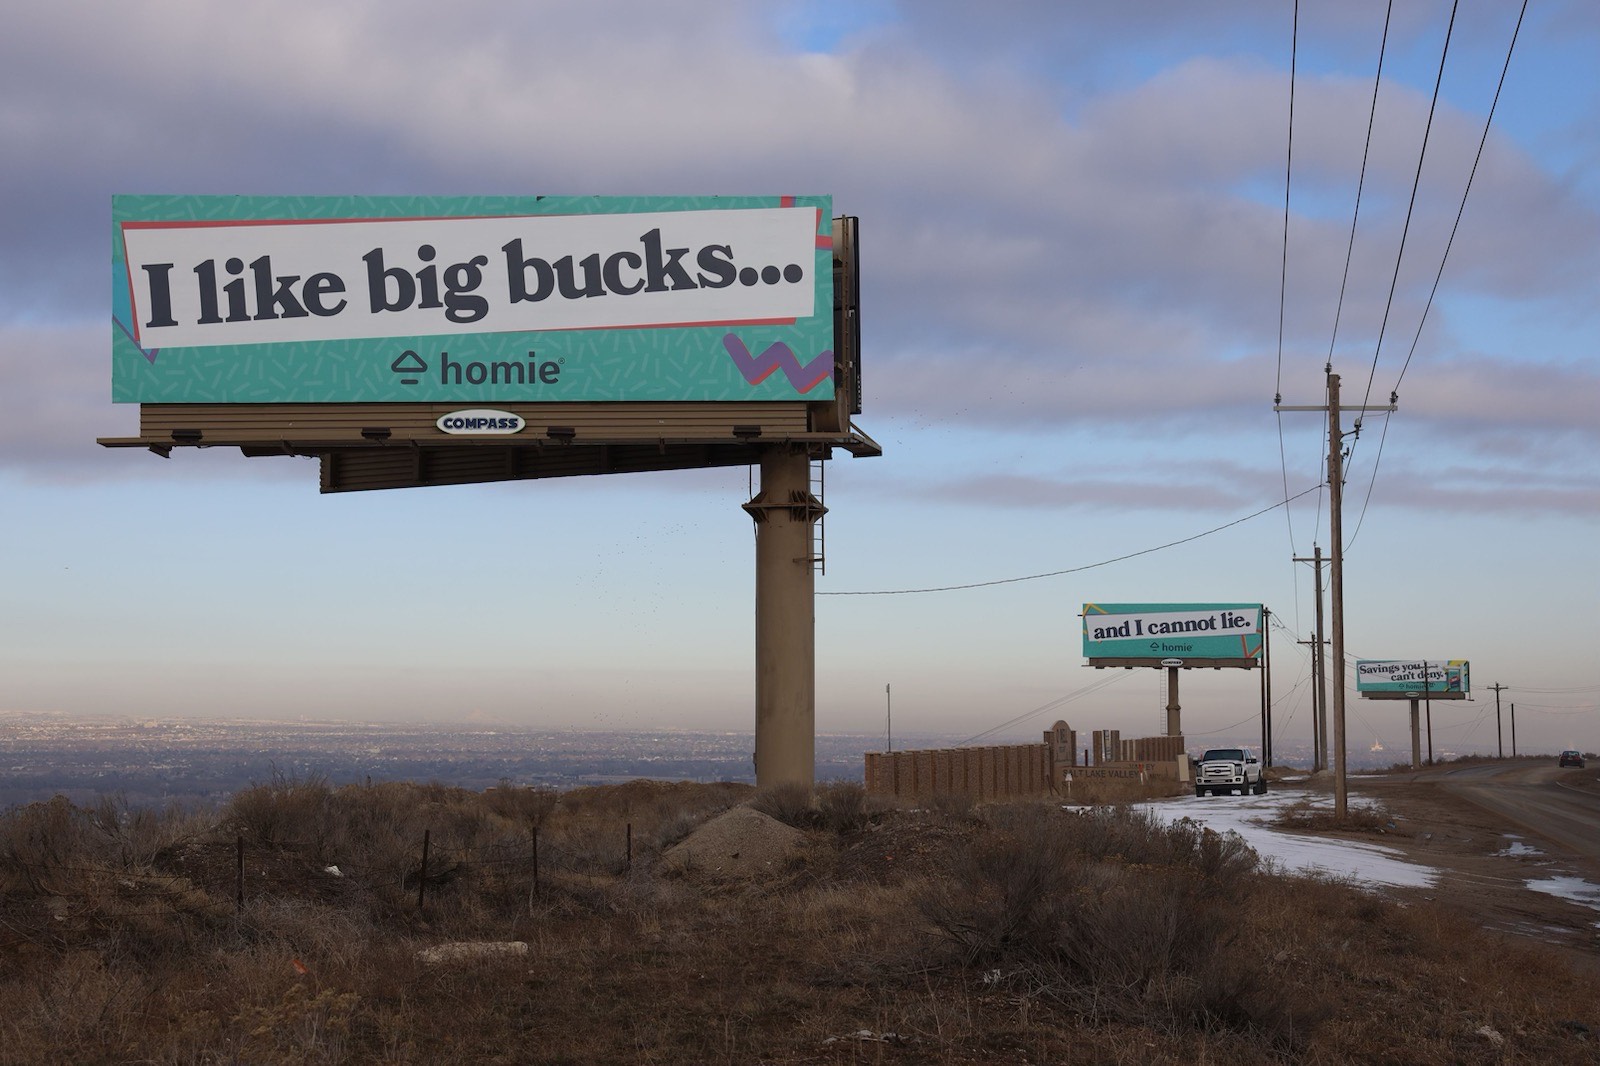 The billboards lining I-15 play a crucial role for the in-crowd of Utah tech, from announcing new products and battling out drama with competitors.